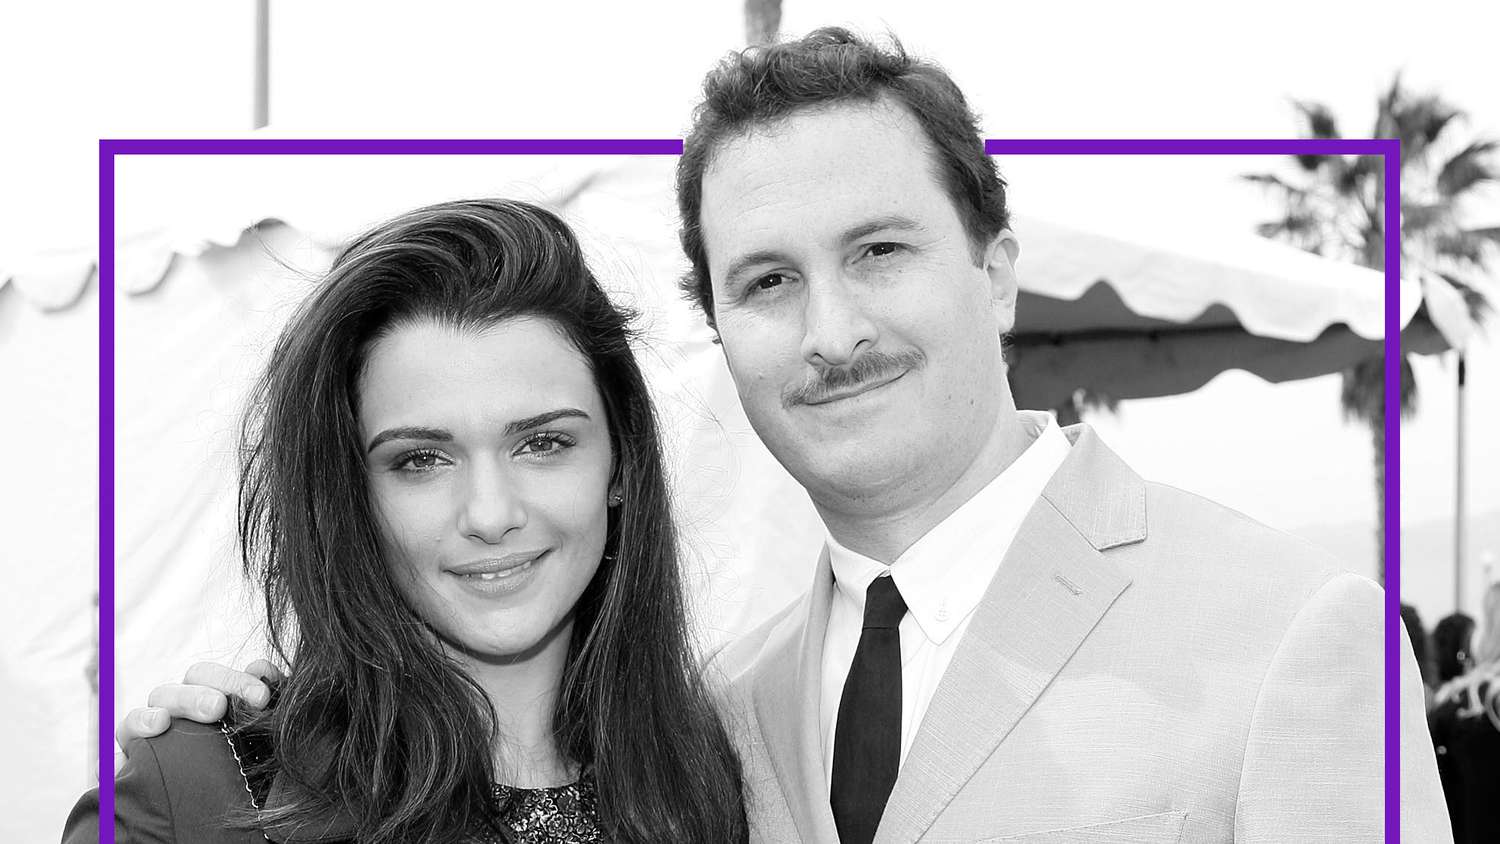 7 Facts You Didn’t Know About Dead Ringers' Rachel Weisz